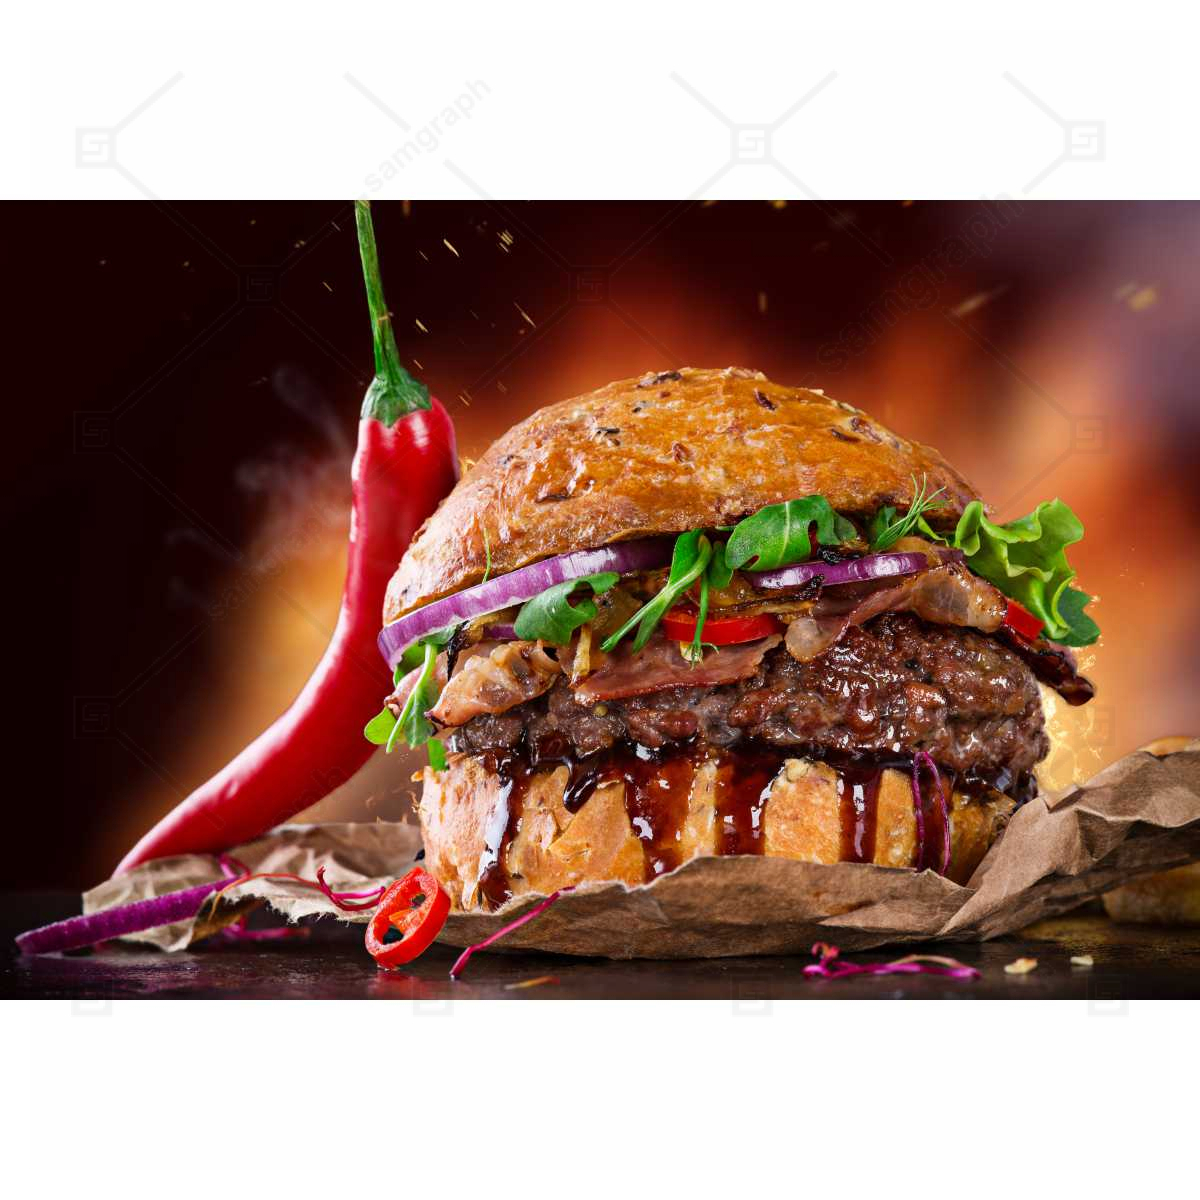 High quality photo of juicy hamburger with fire and pepper lettuce onion parsley 1 وکتور